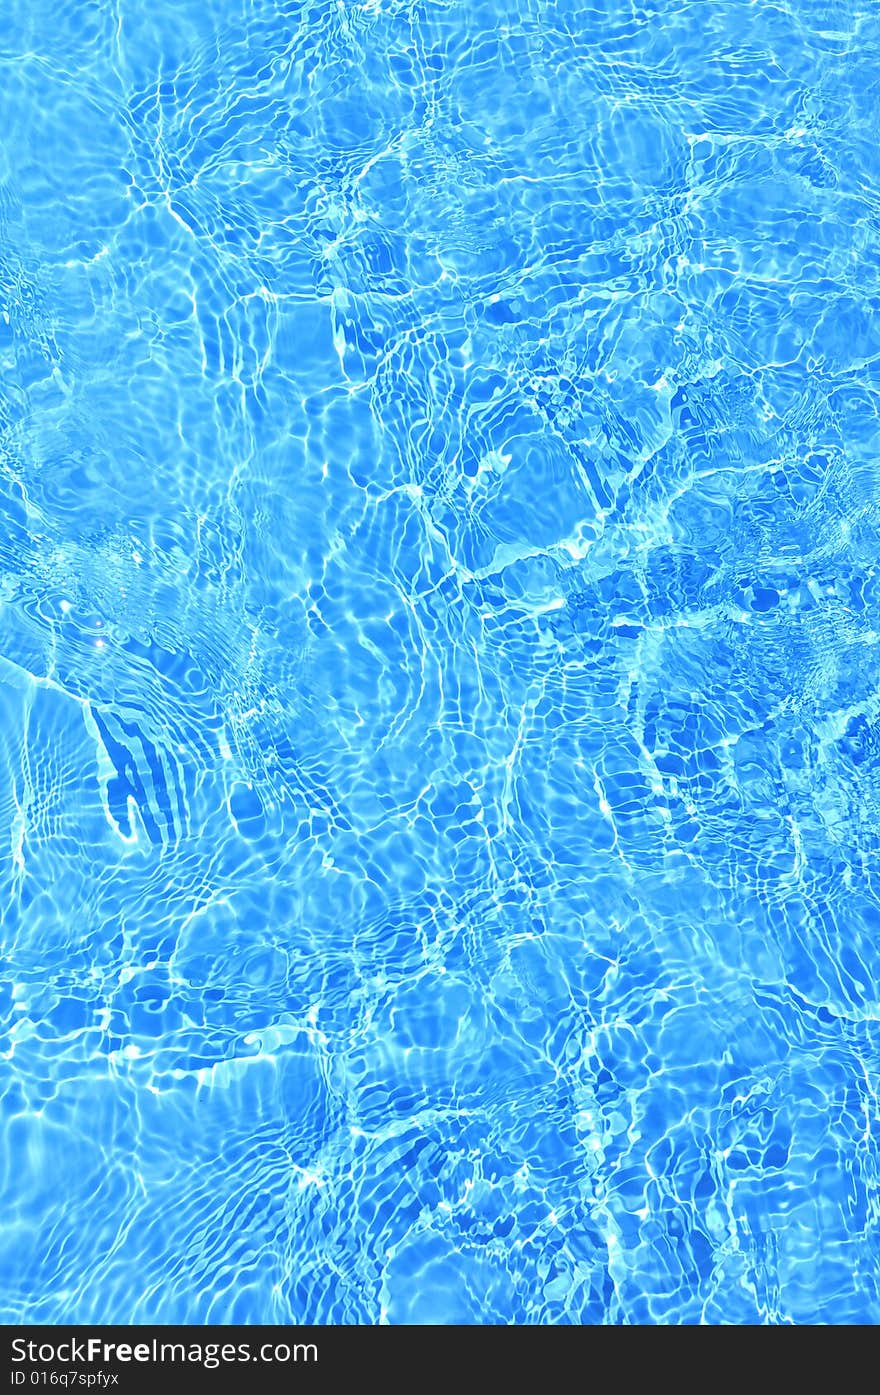 Blue swimming pool water background. Blue swimming pool water background